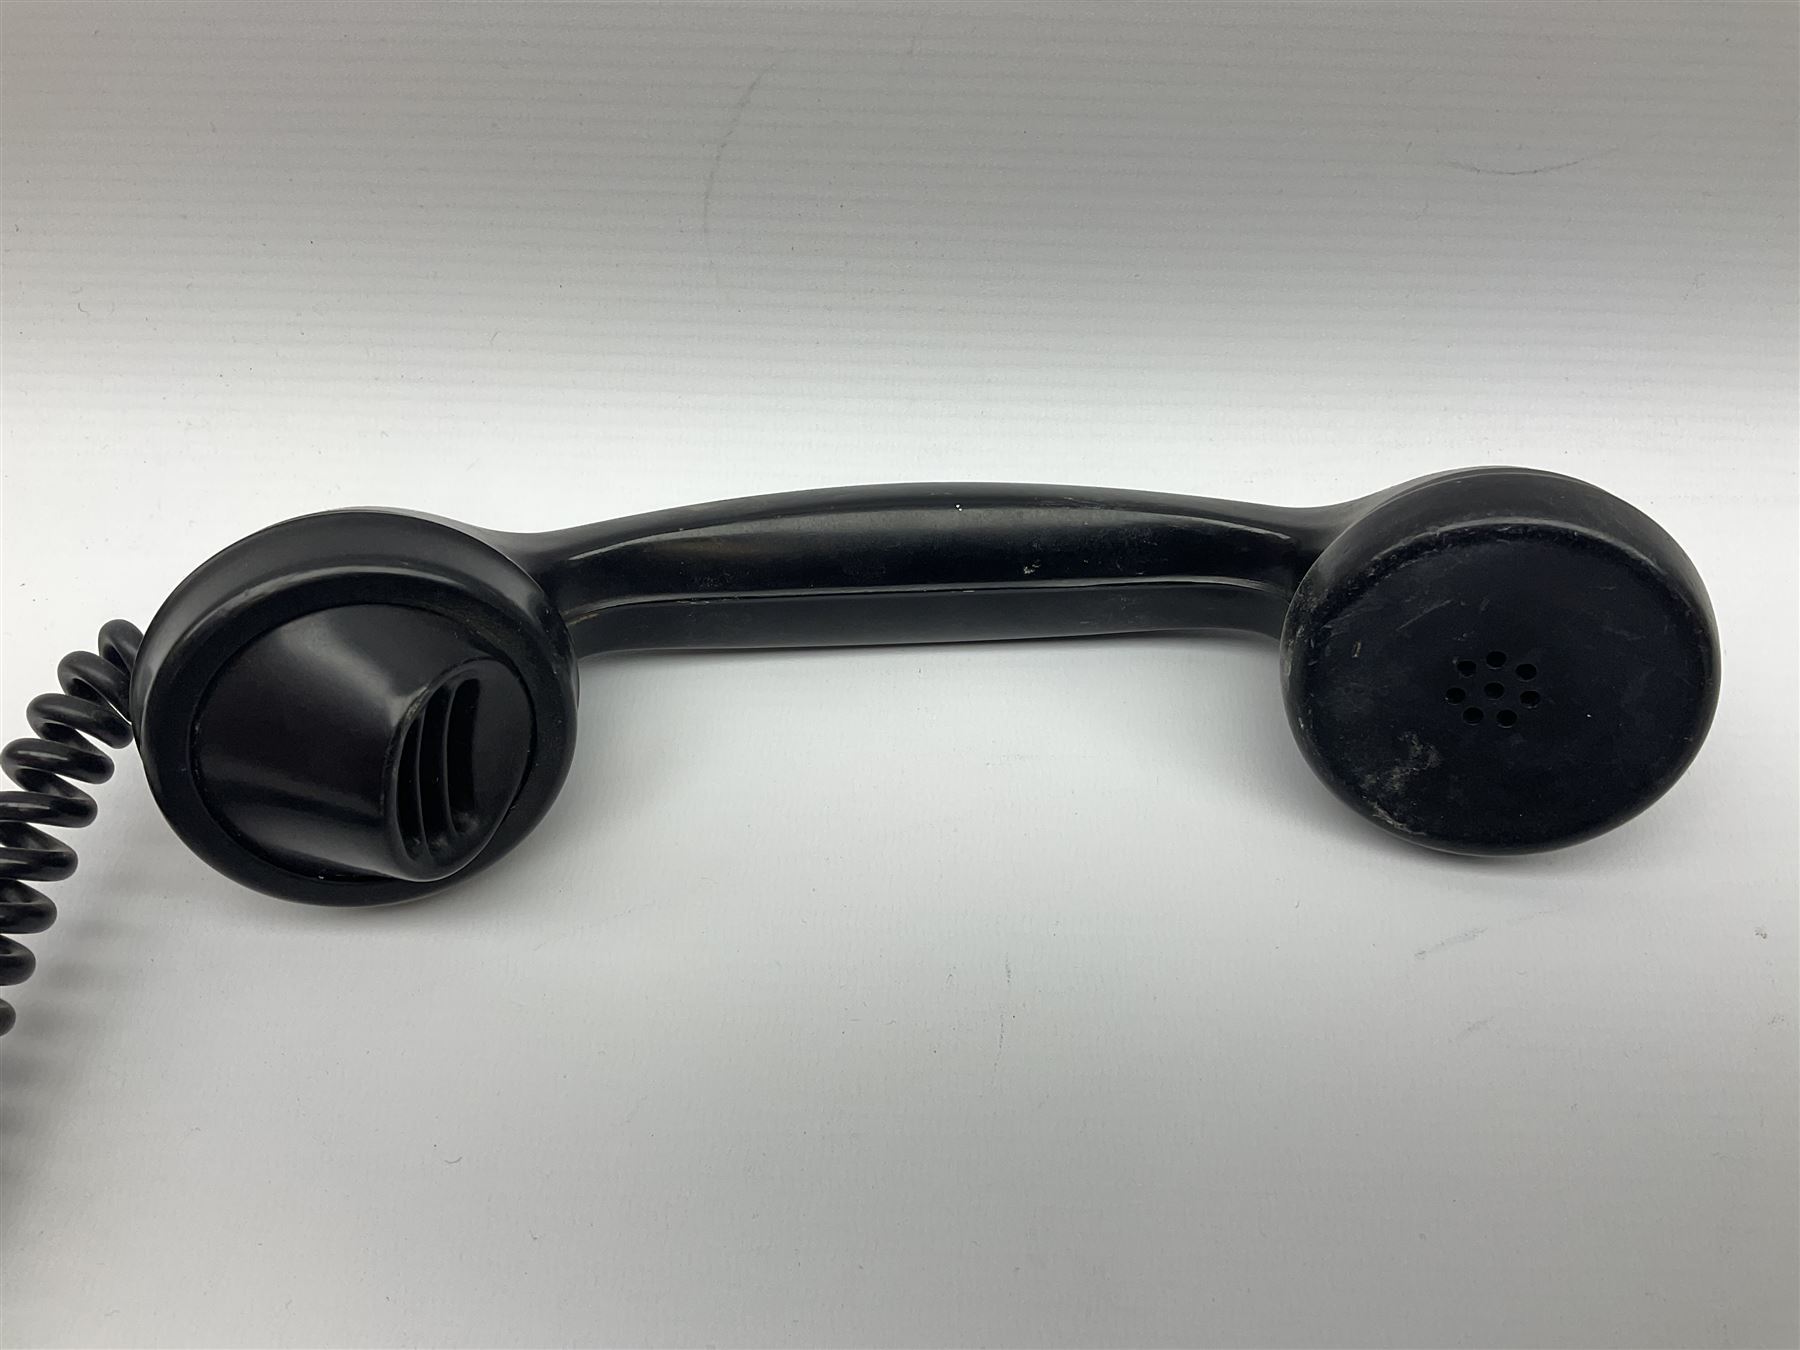 Black Bakelite telephone with rotary dial - Image 6 of 7